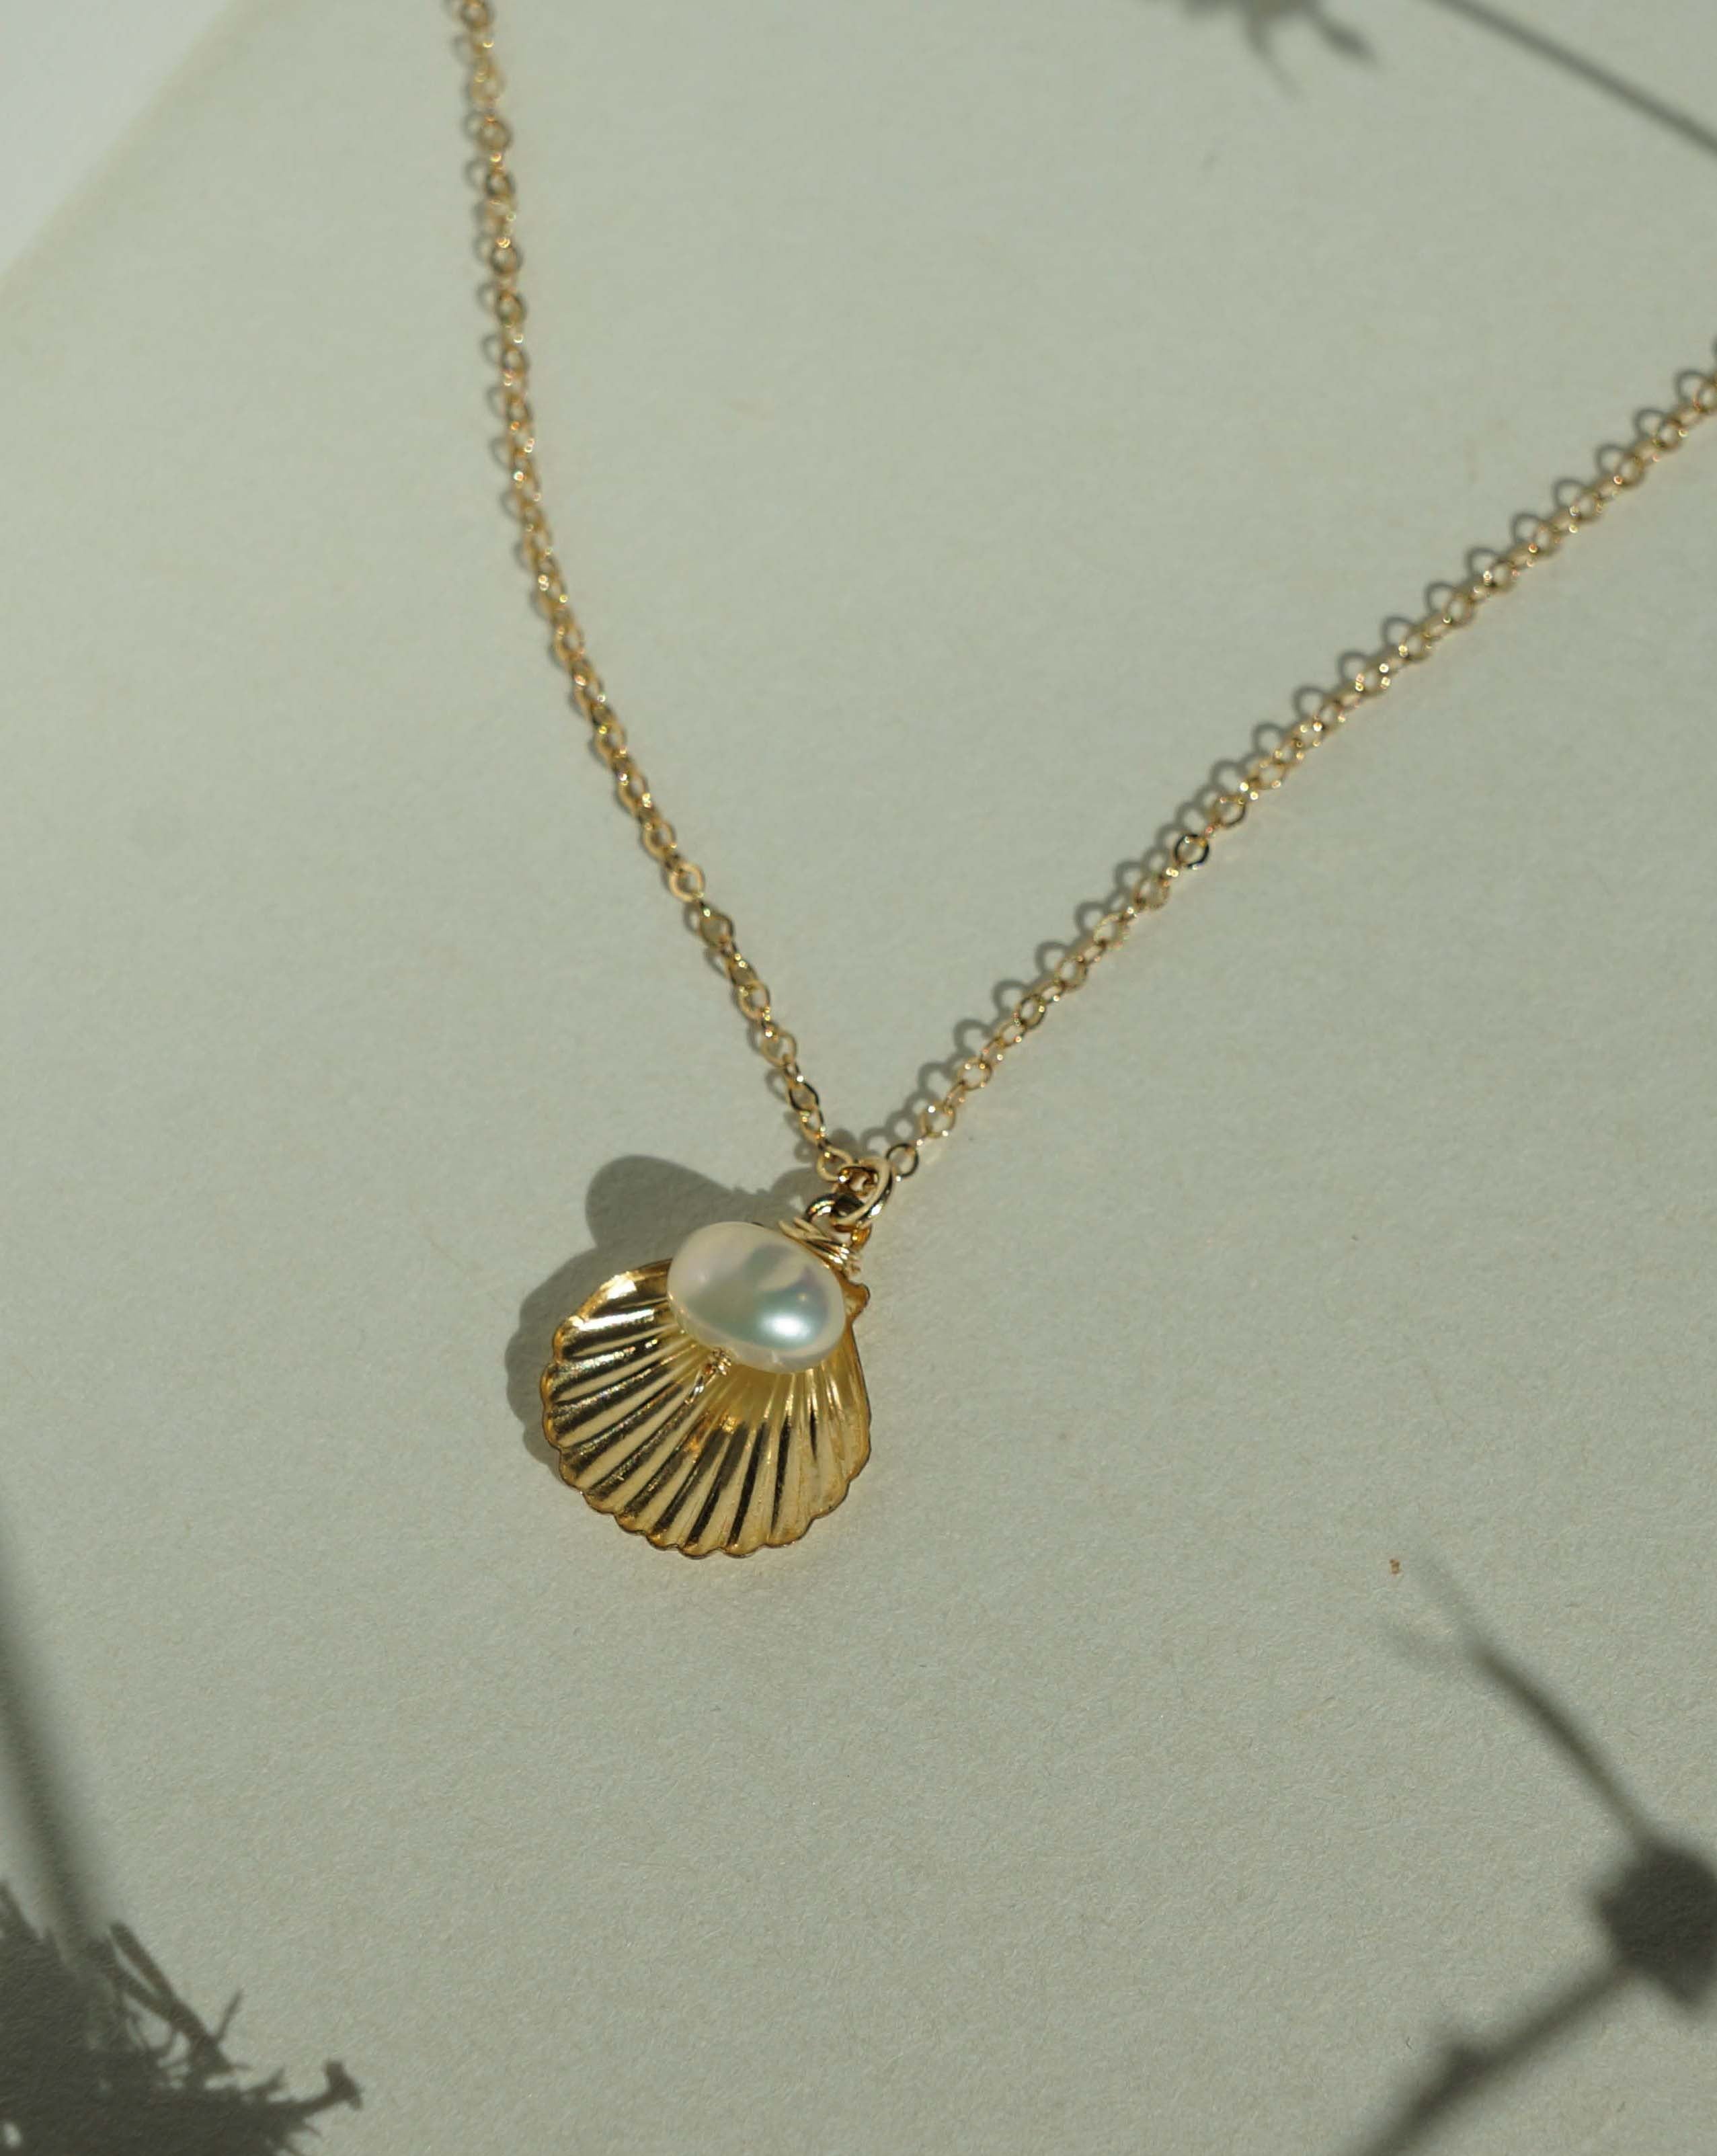 Belle Necklace by KOZAKH. A 16 to 18 inch adjustable length necklace in 14K Gold Filled, featuring a 5mm flat irregular Pearl and a Shell charm.